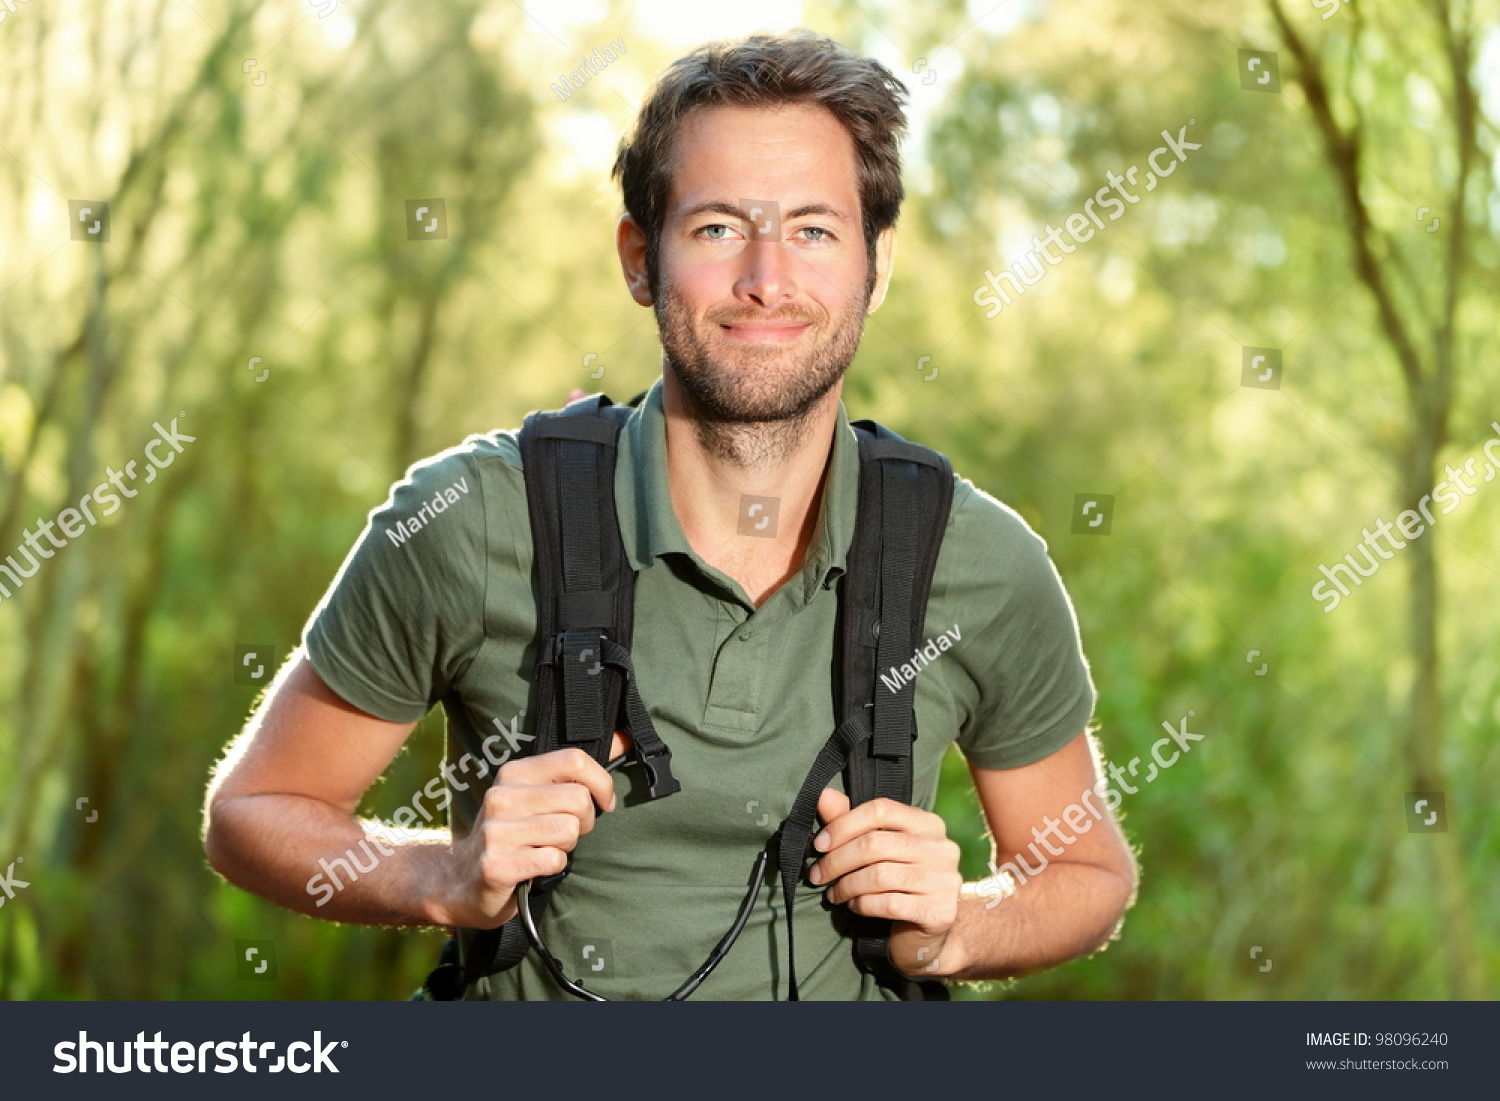 Young Man Hiking Smiling Happy Portrait. Male Hiker Walking In Forest ...